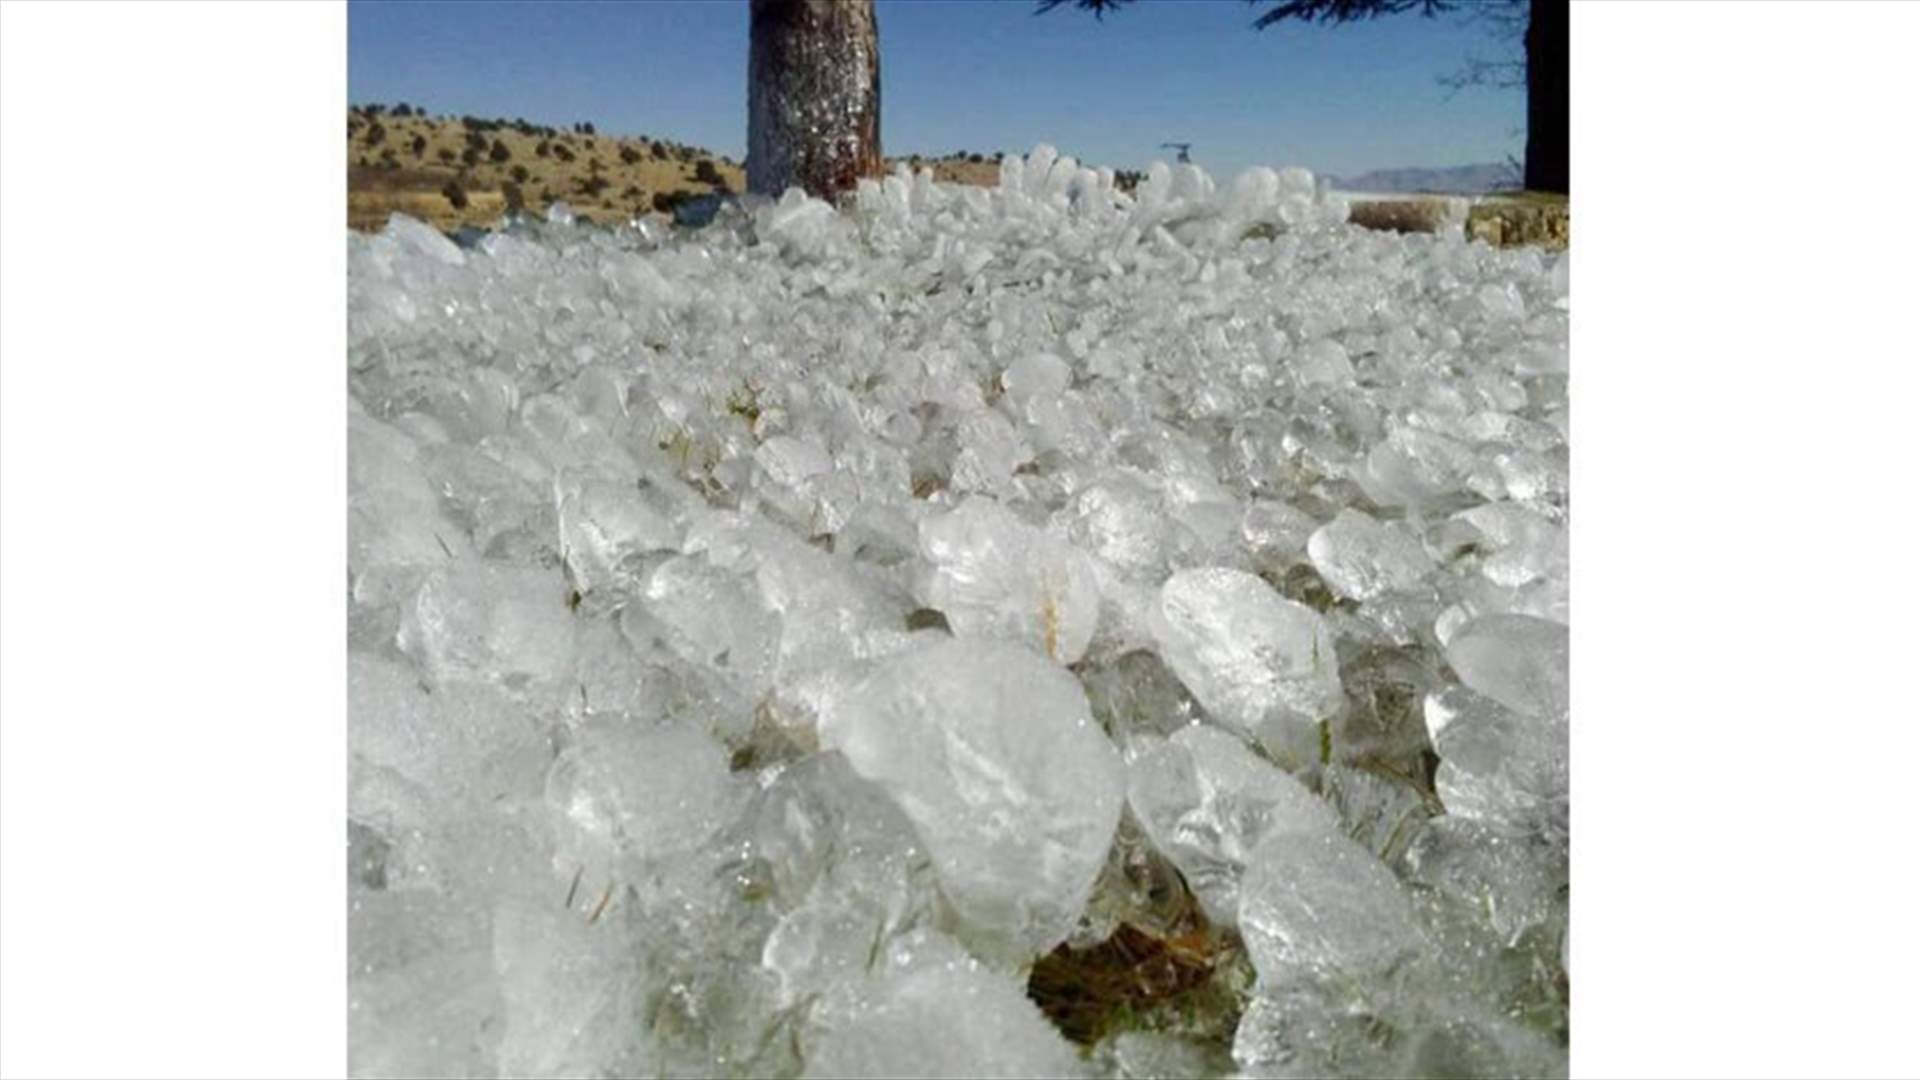 [PHOTO] Ice forms in Donniyeh due to significant drop in temperatures